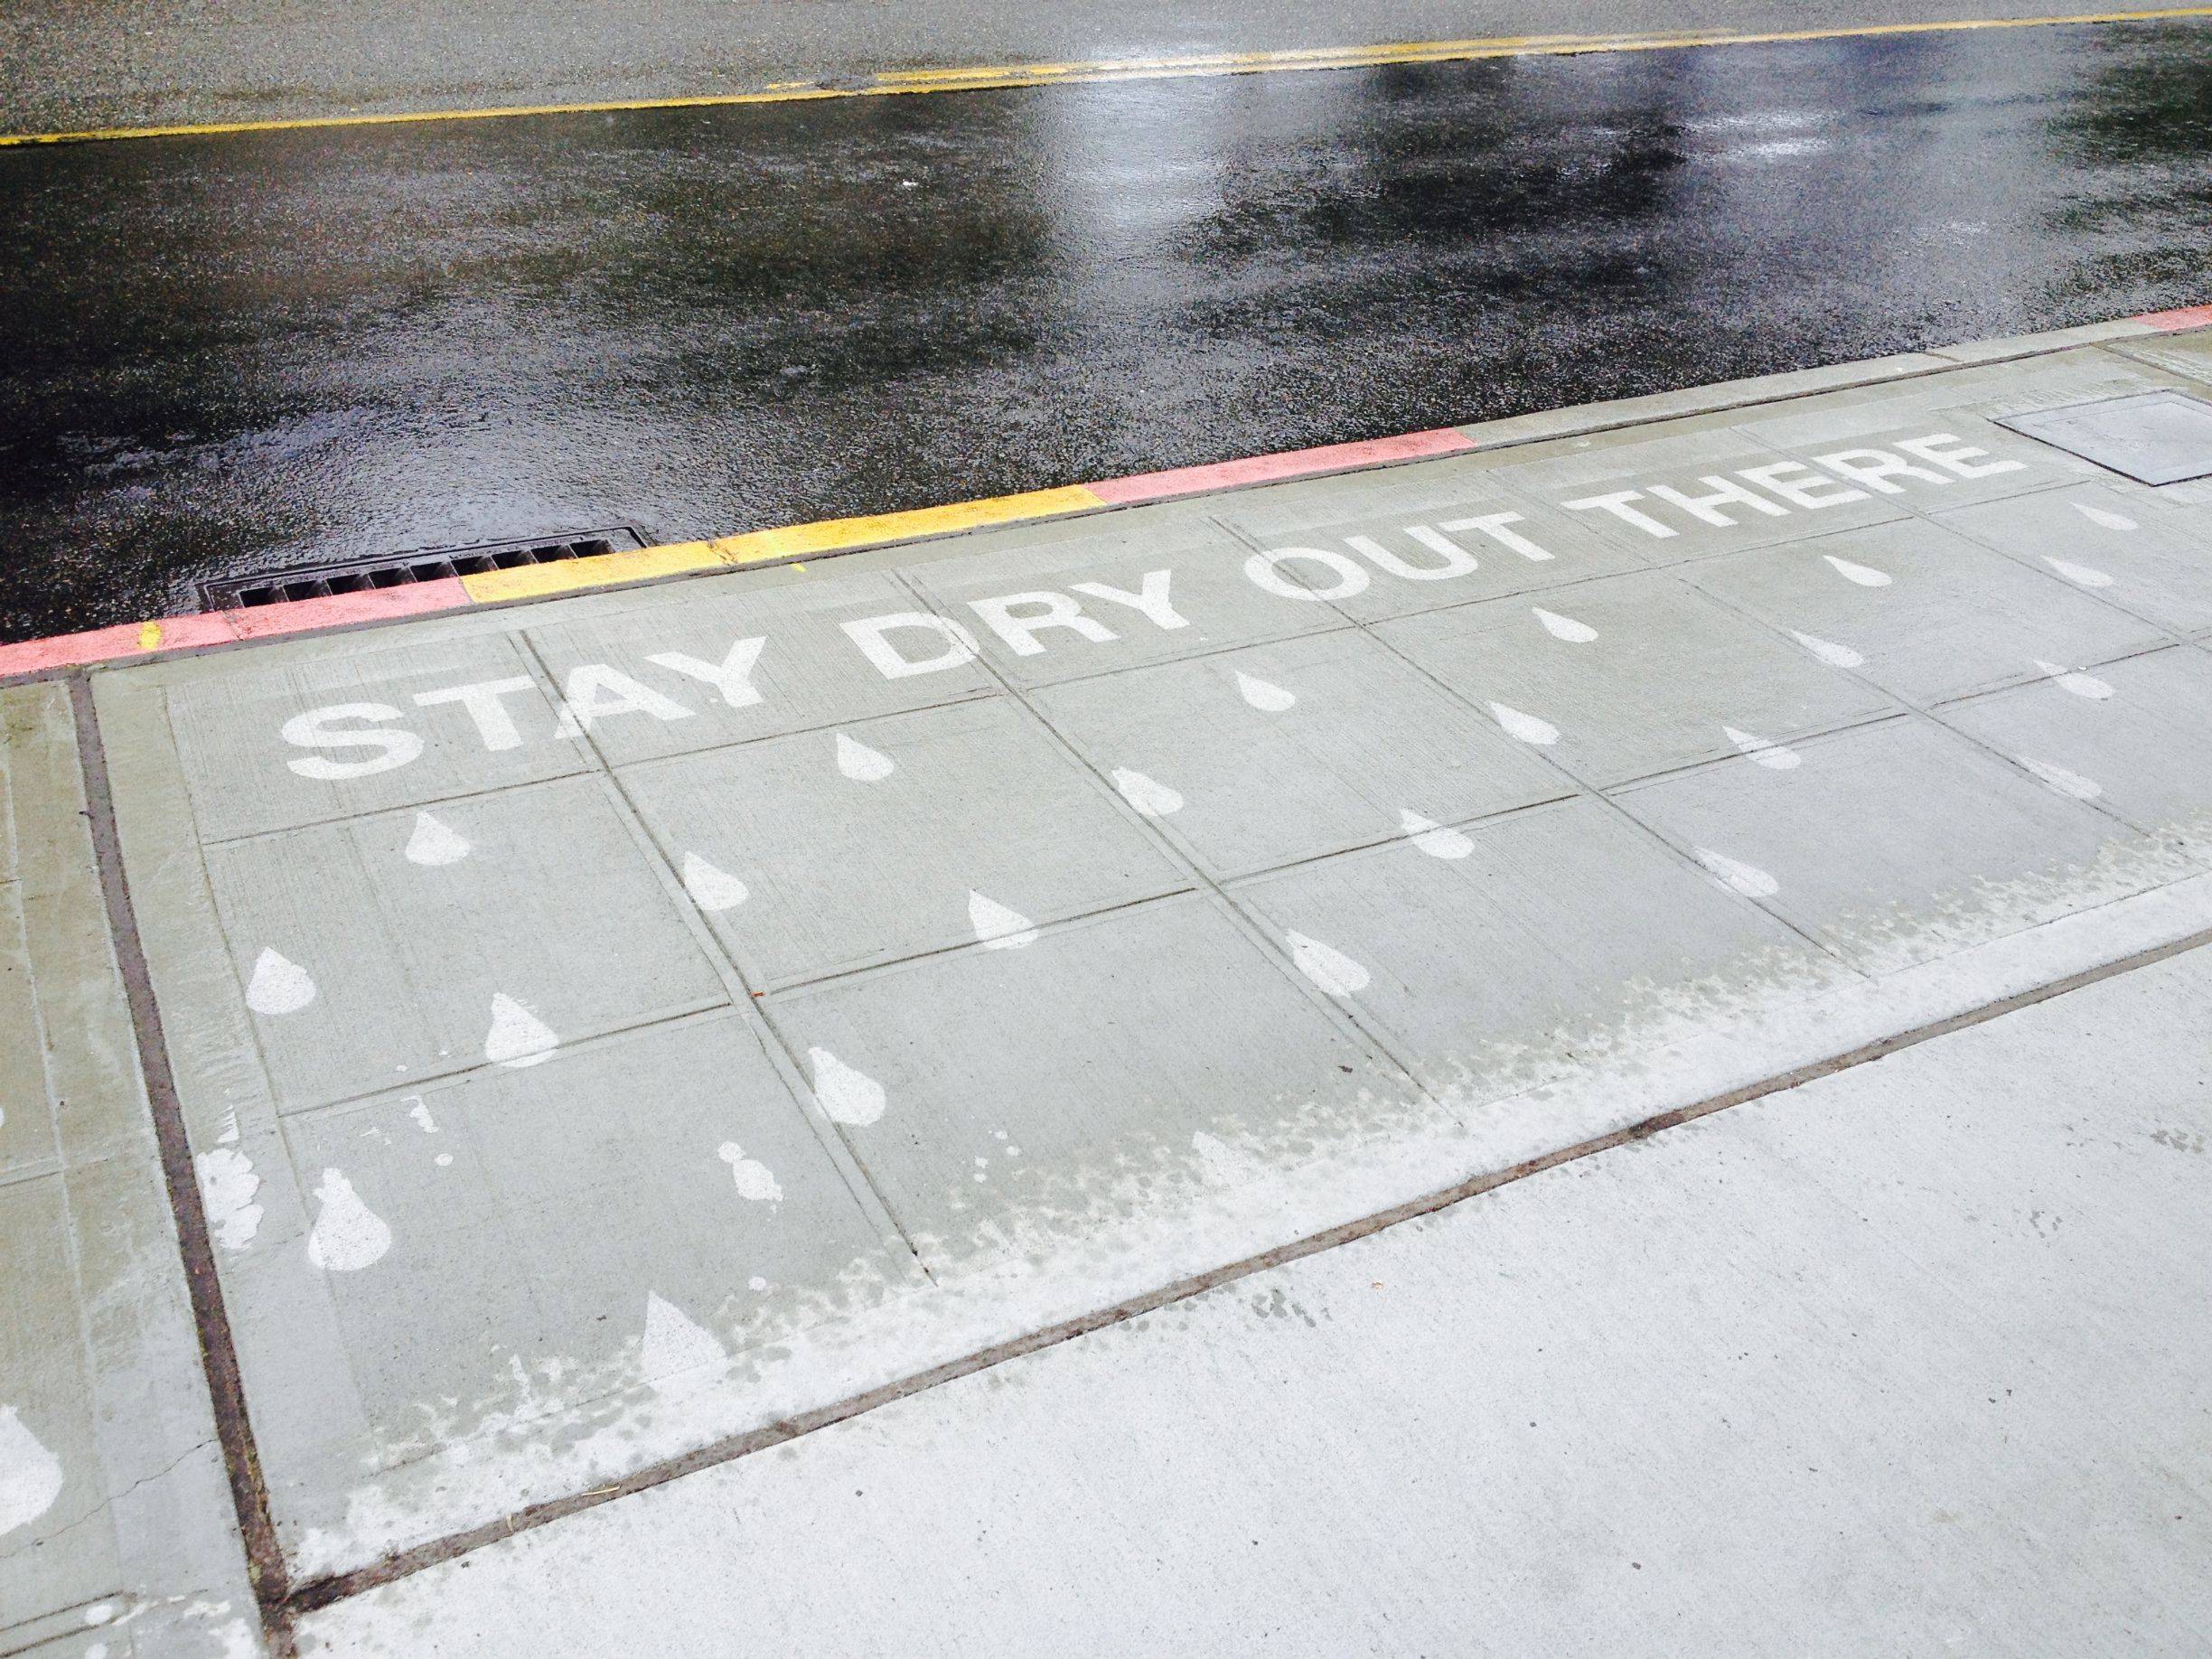 Superhydrophobic art that only appears in the rain